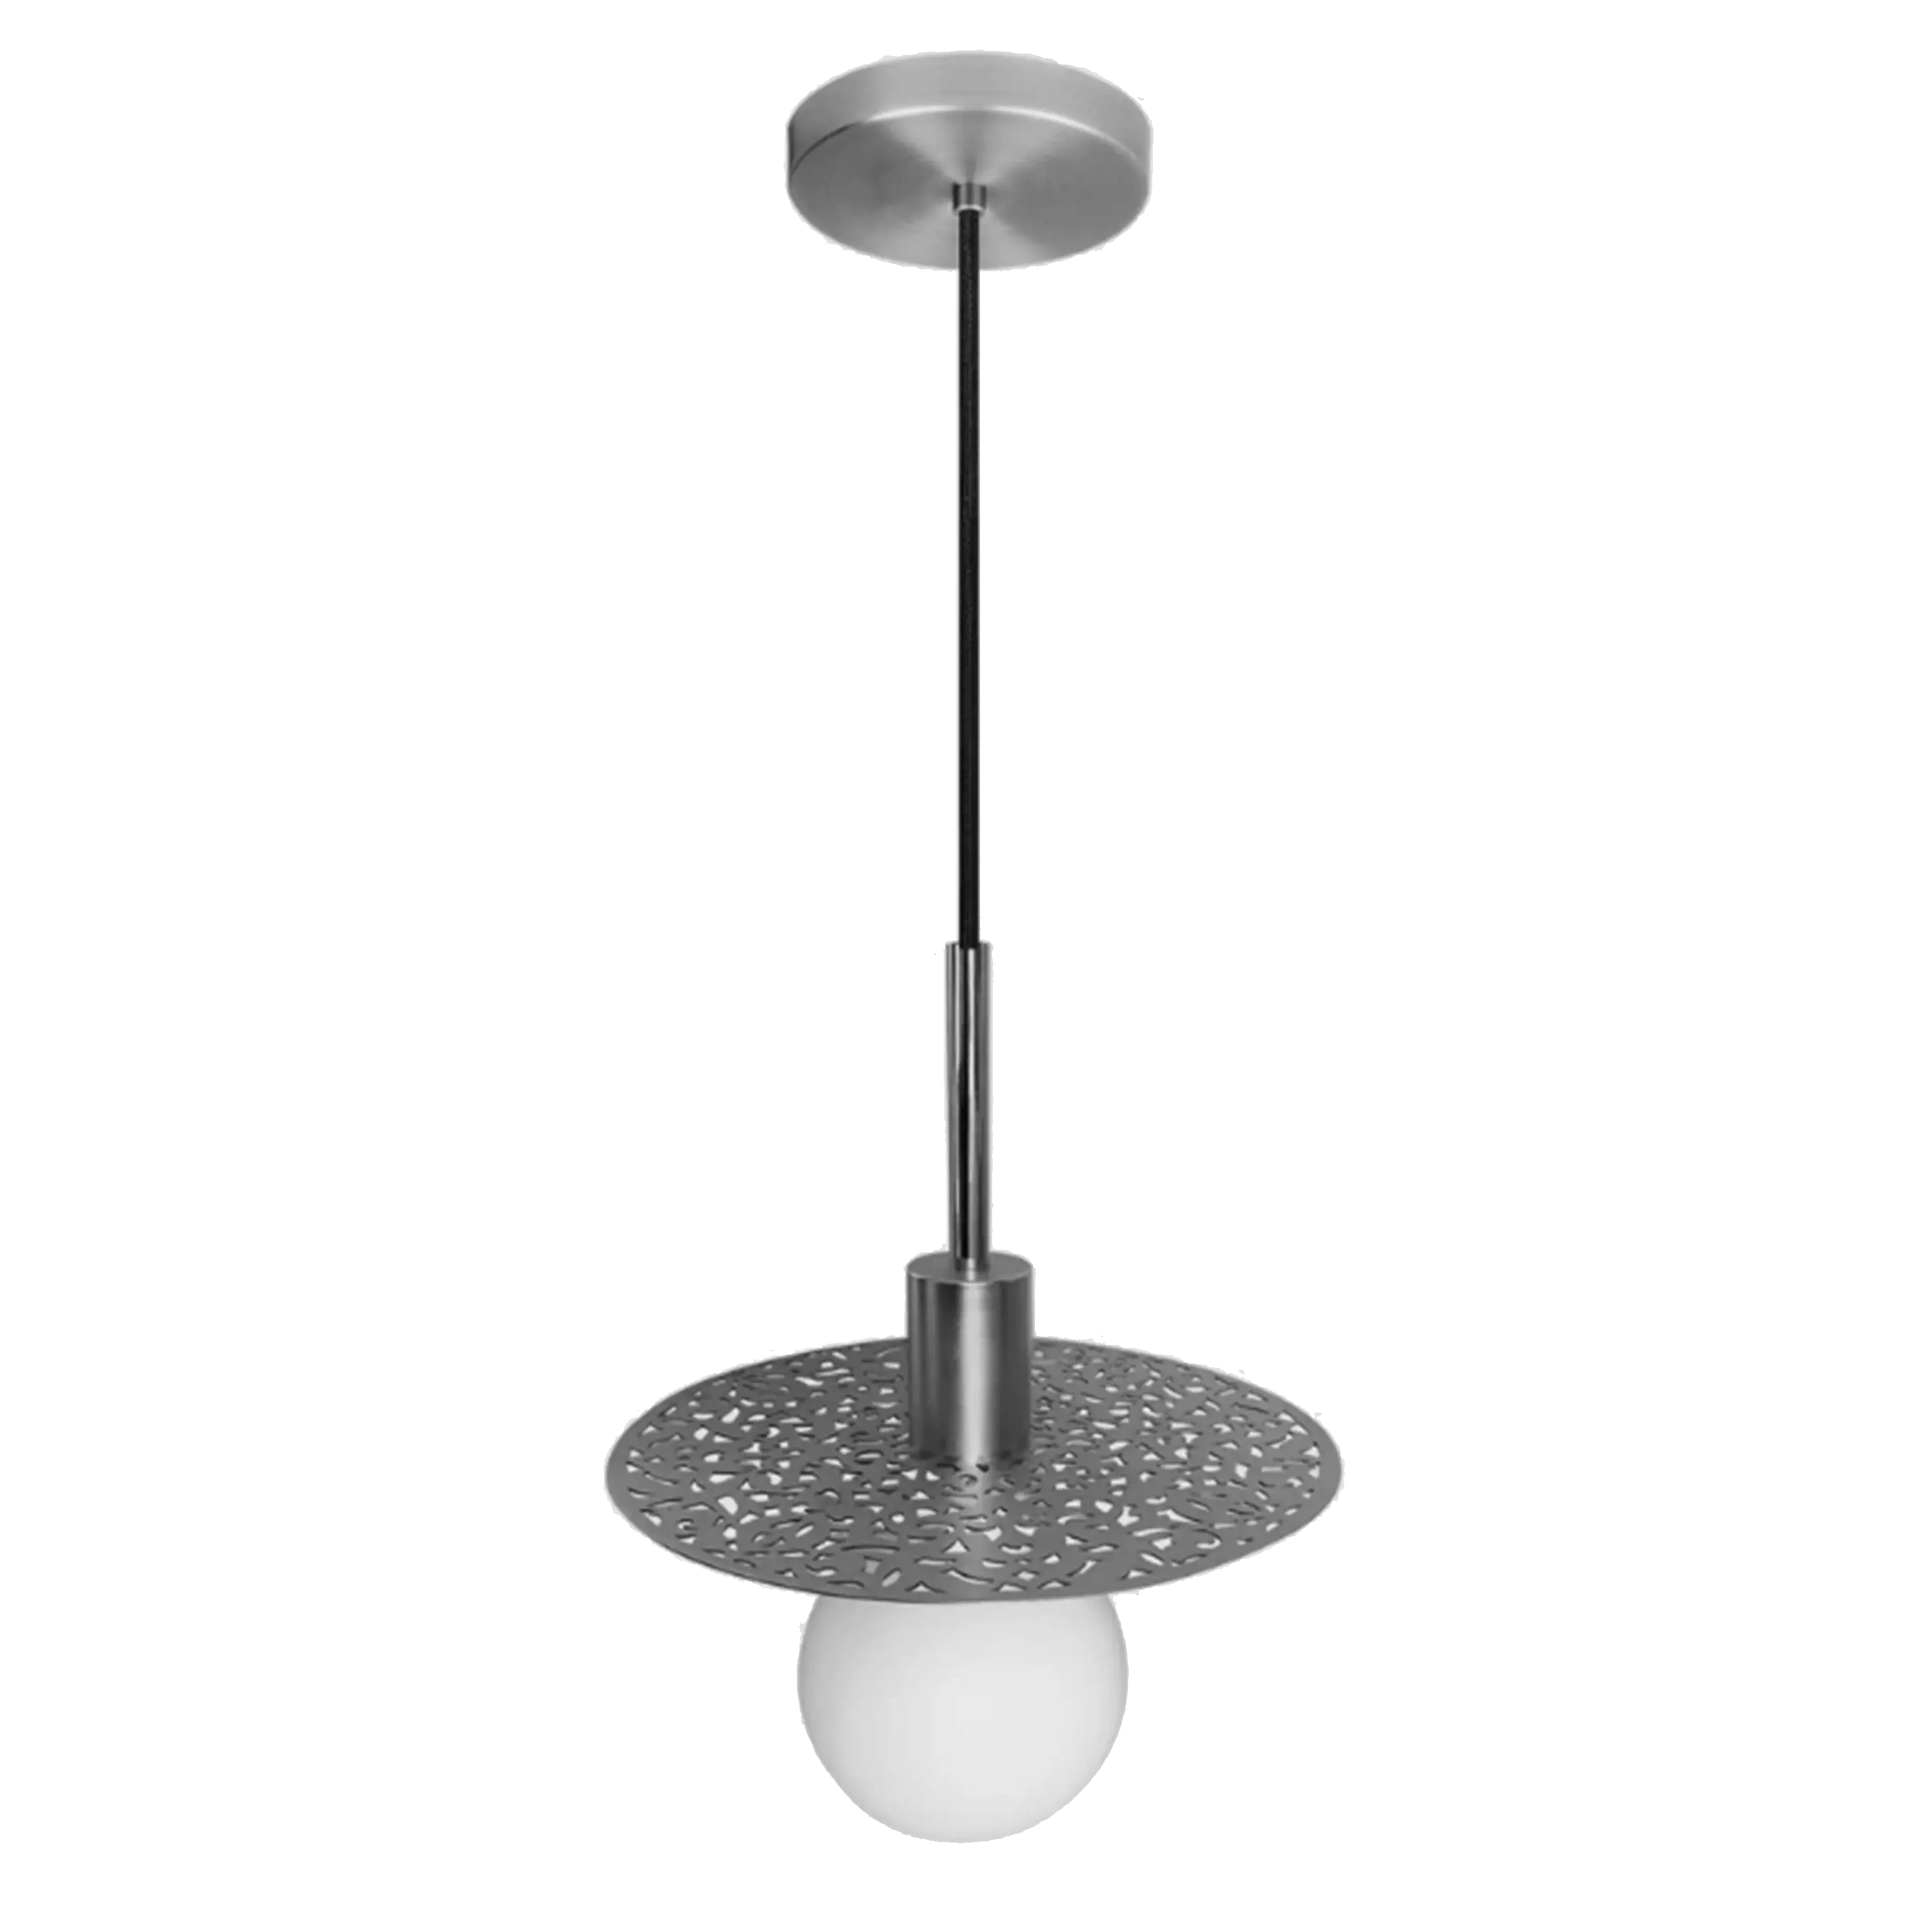 Dounia home Pendant light in  nickel silver  made of Metal, Model: Riad disc LED Suspension